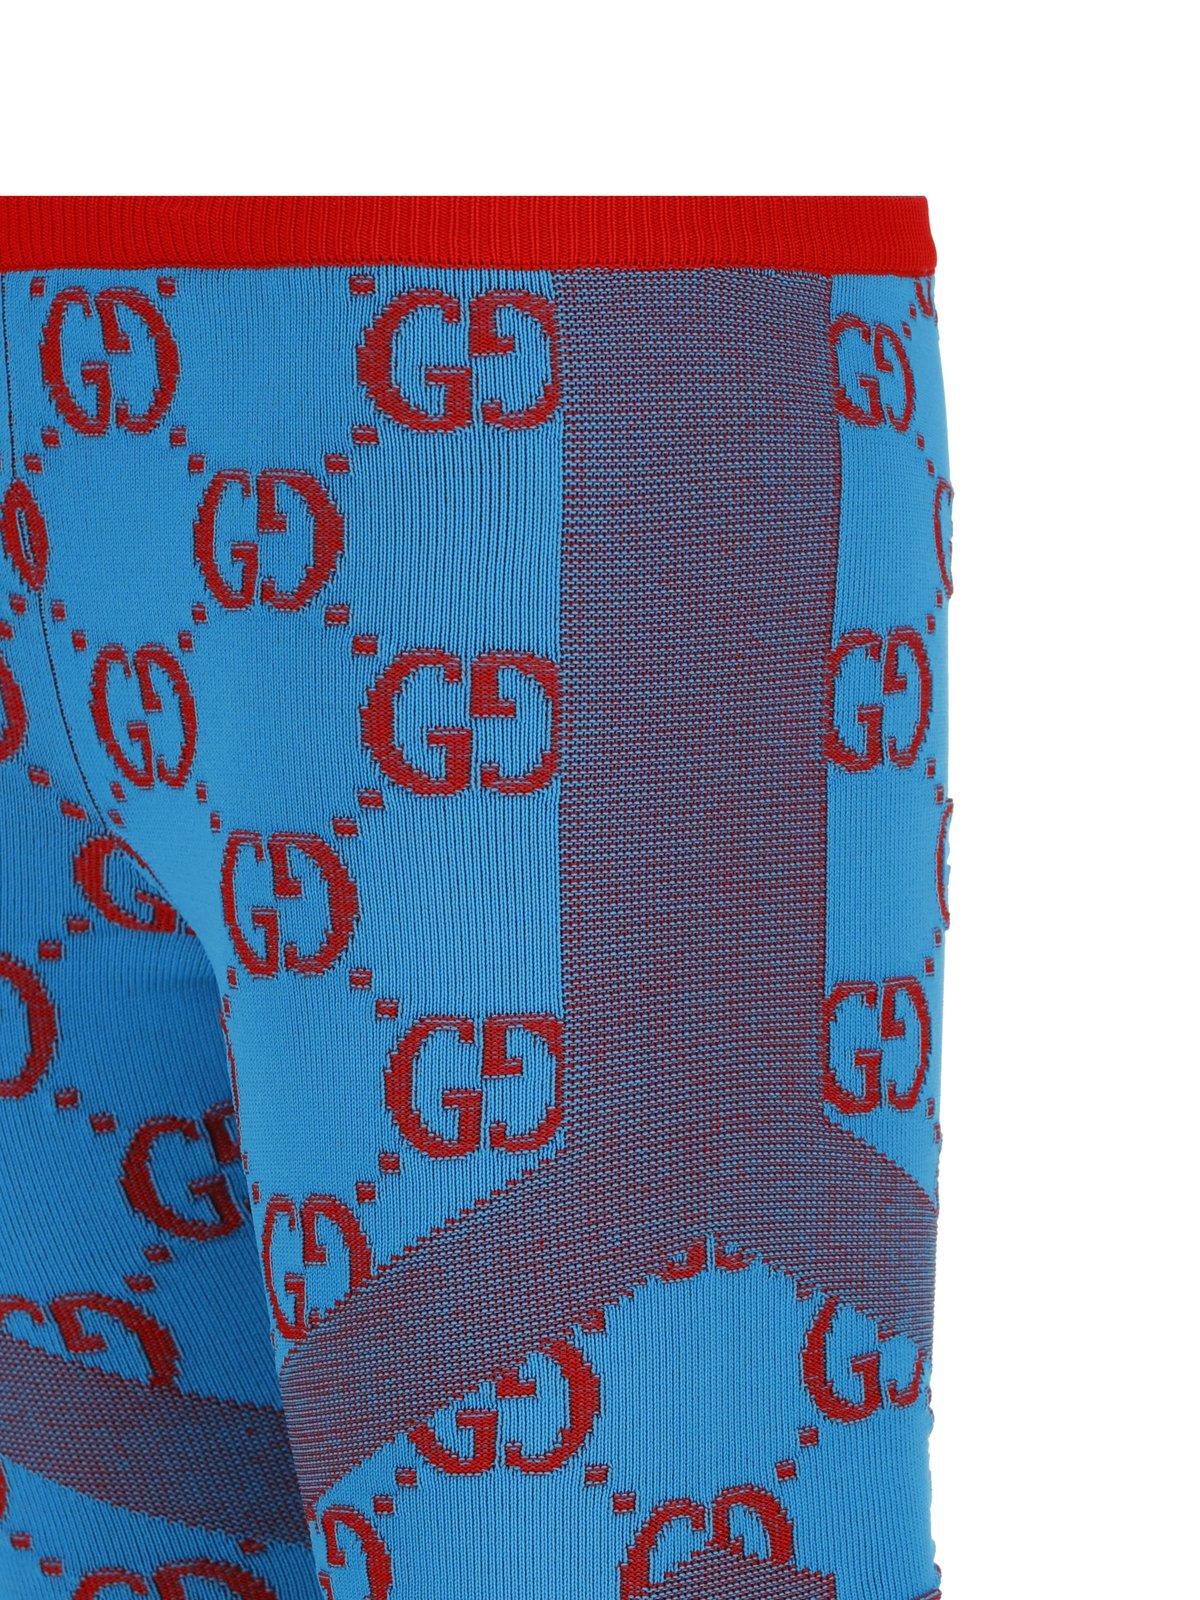 Shop Gucci All-over Patterned Leggings